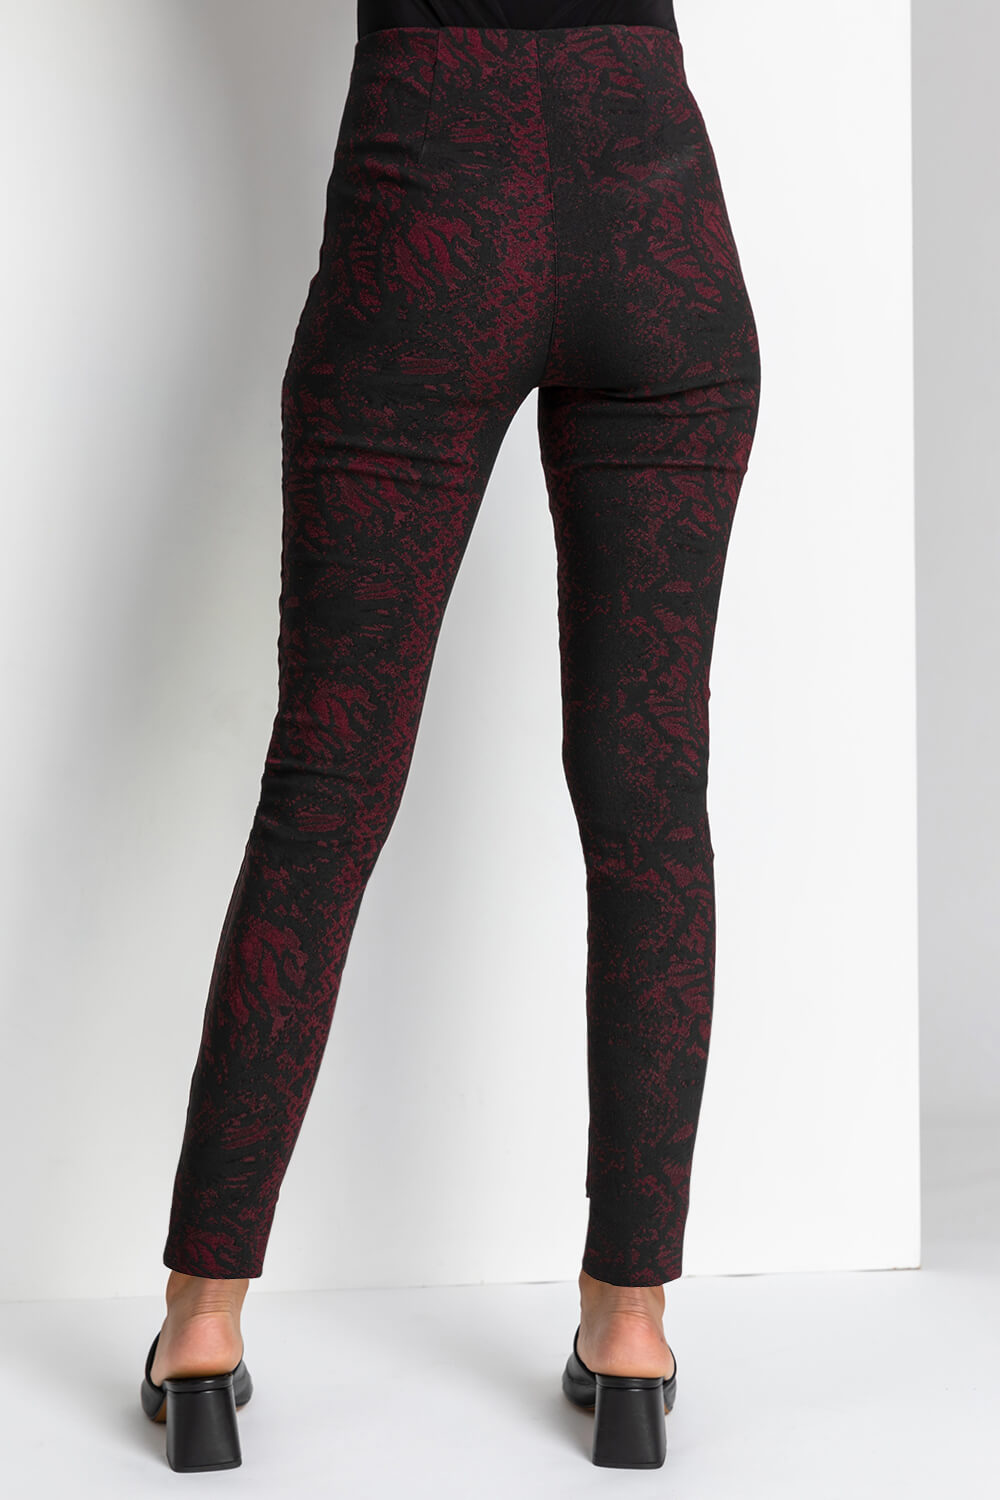 Bordeaux Snake Print Full Length Stretch Trousers, Image 2 of 4